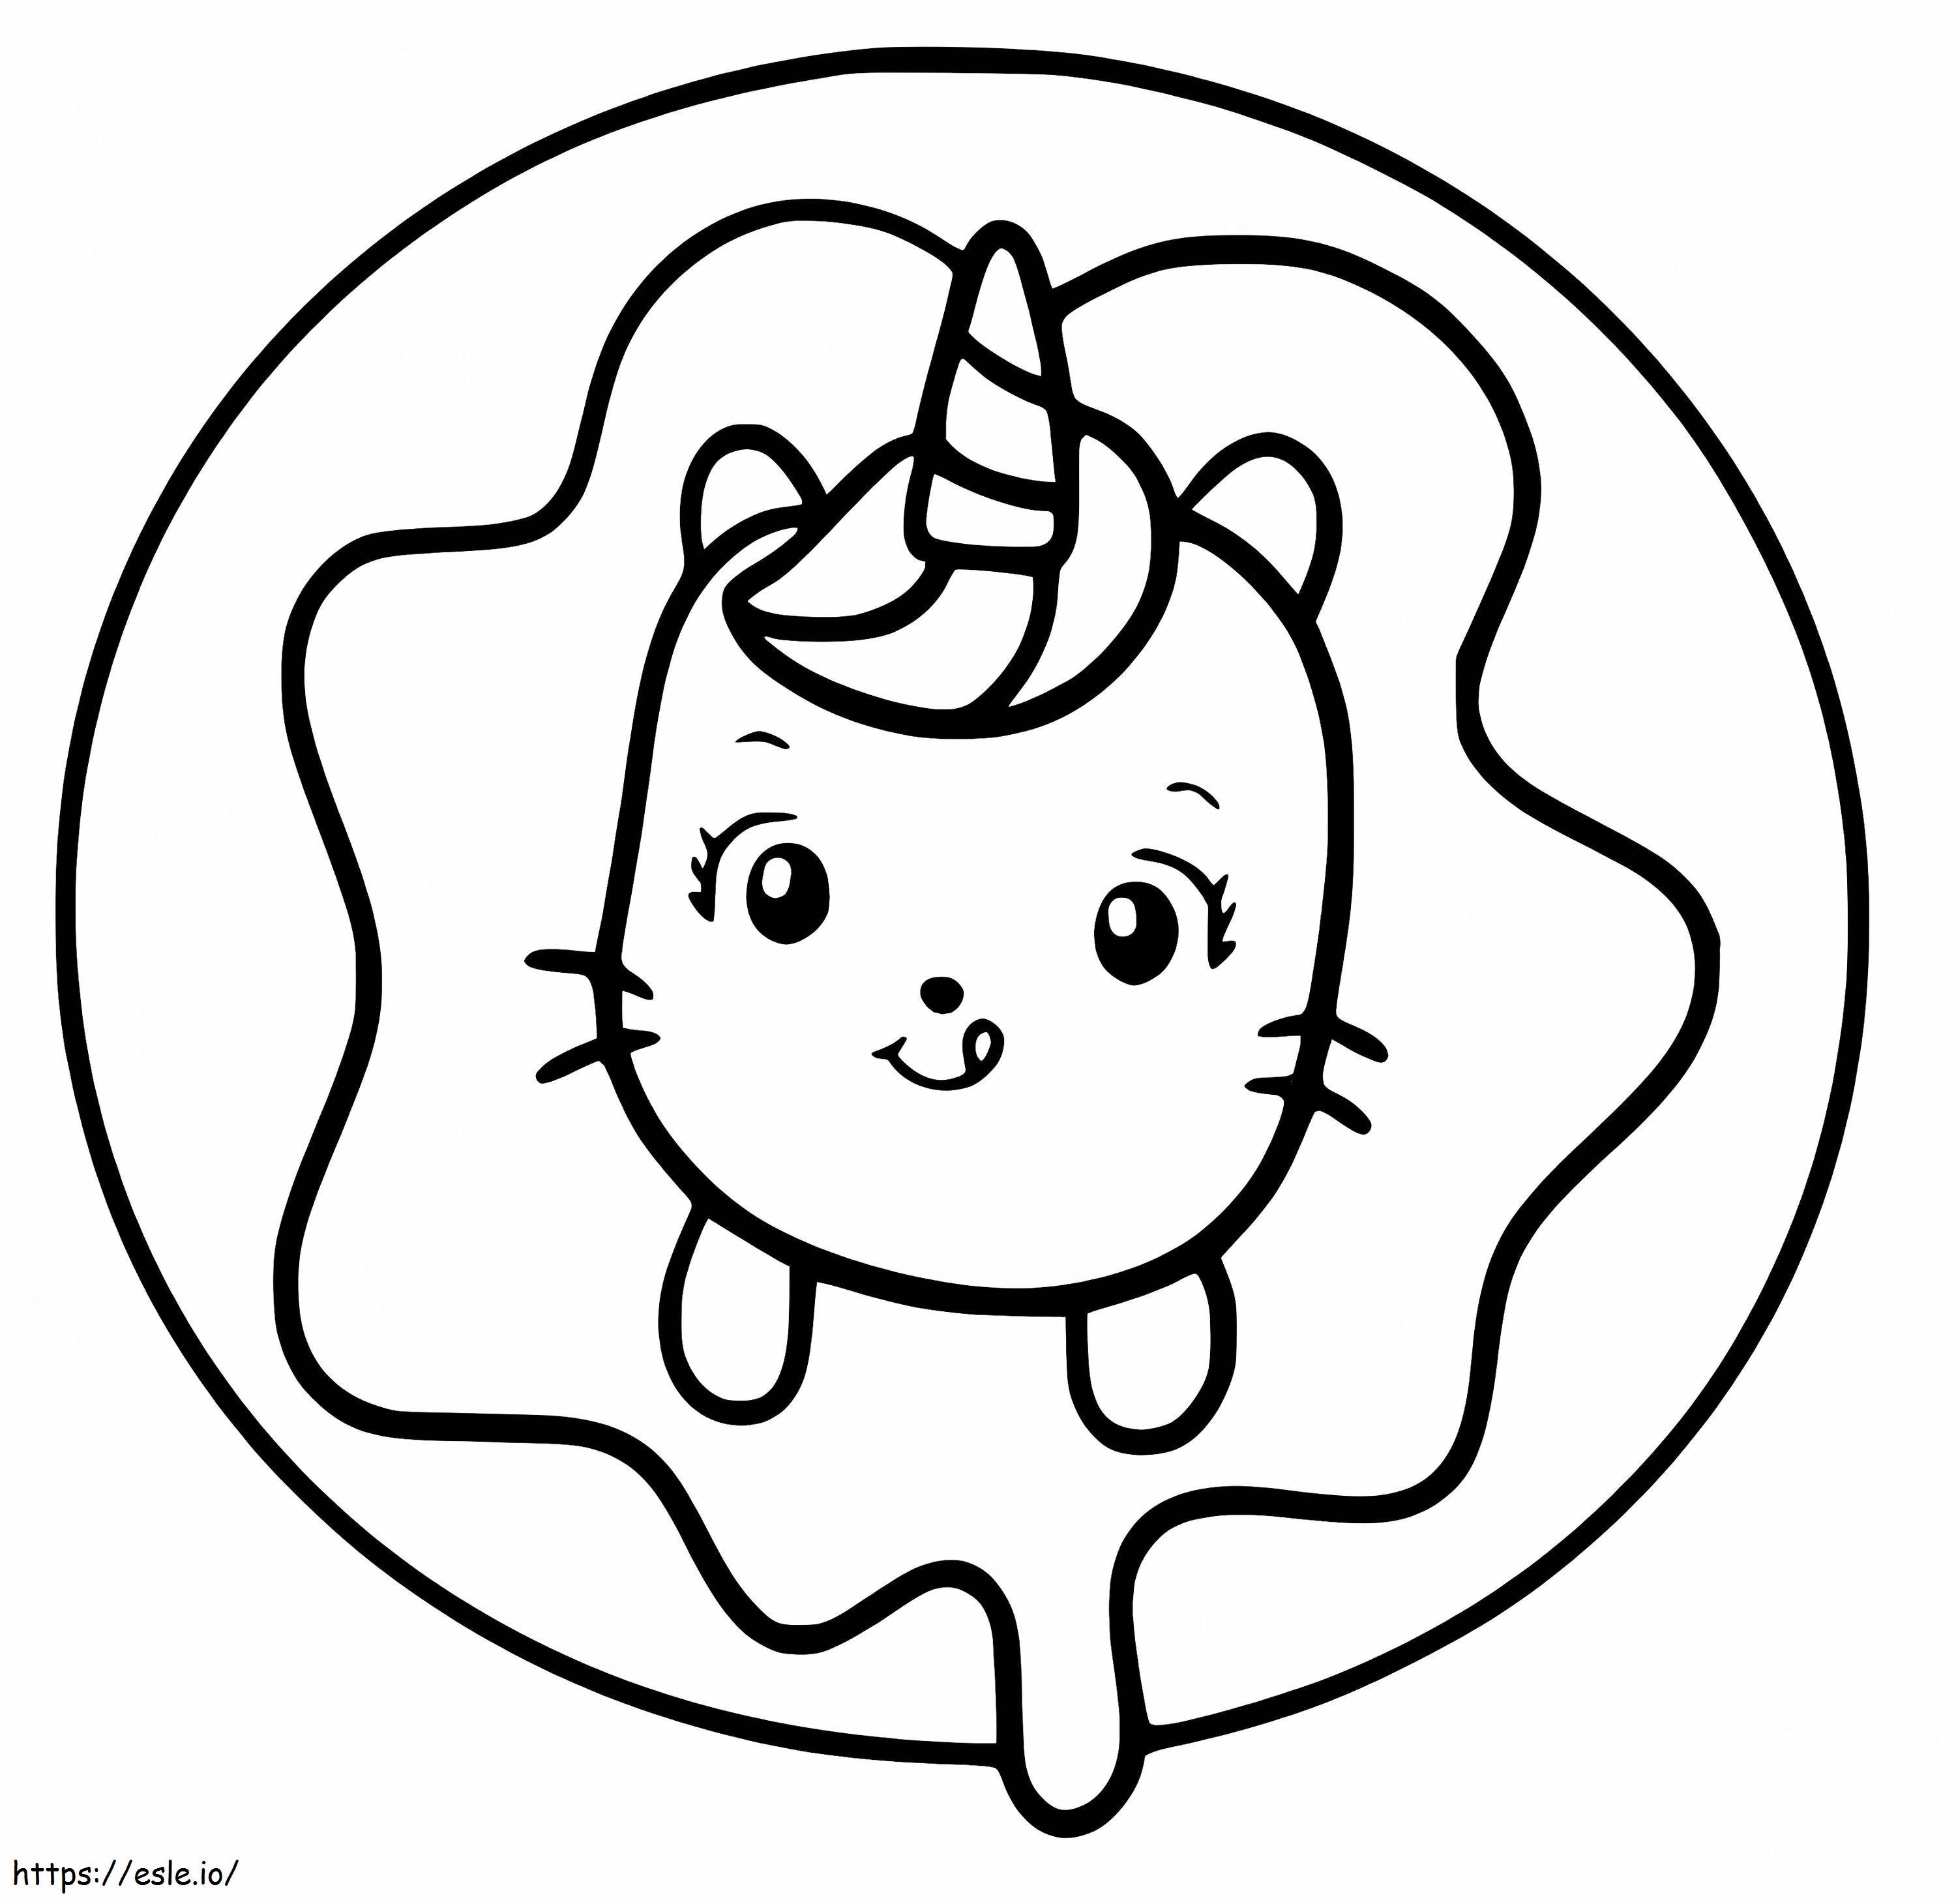 Unicorn Cat In Donut coloring page